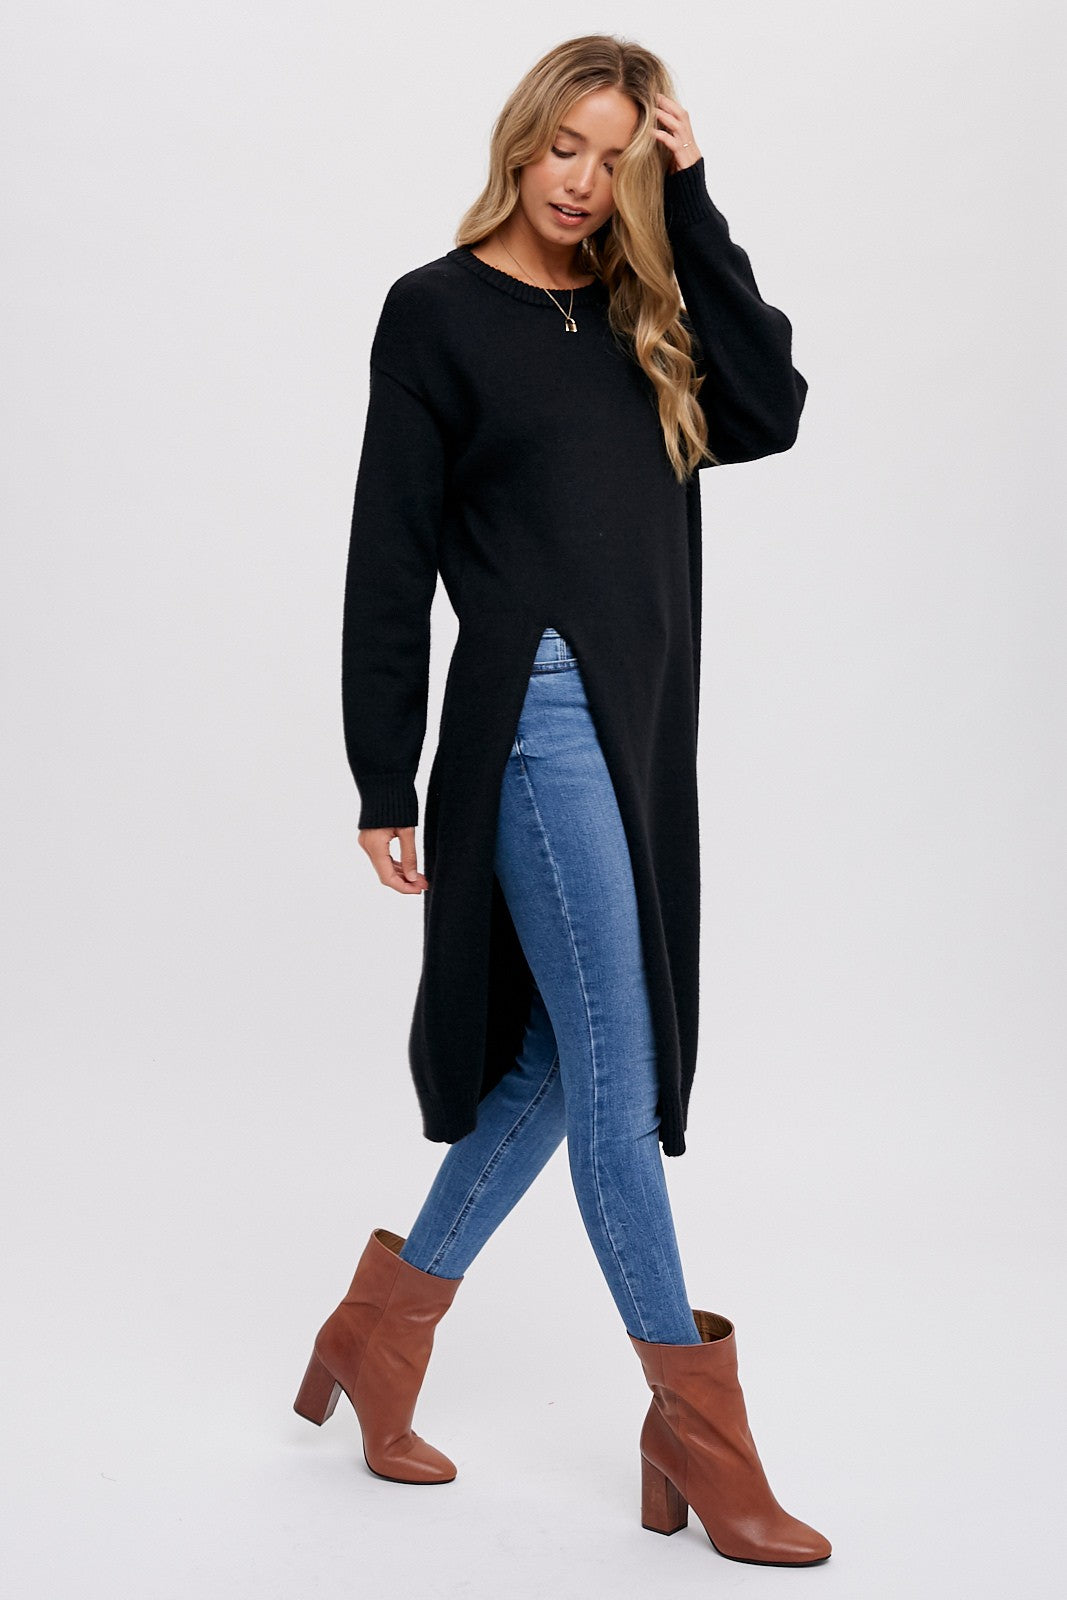 Stay Classy High Slit Longline Pullover Sweater